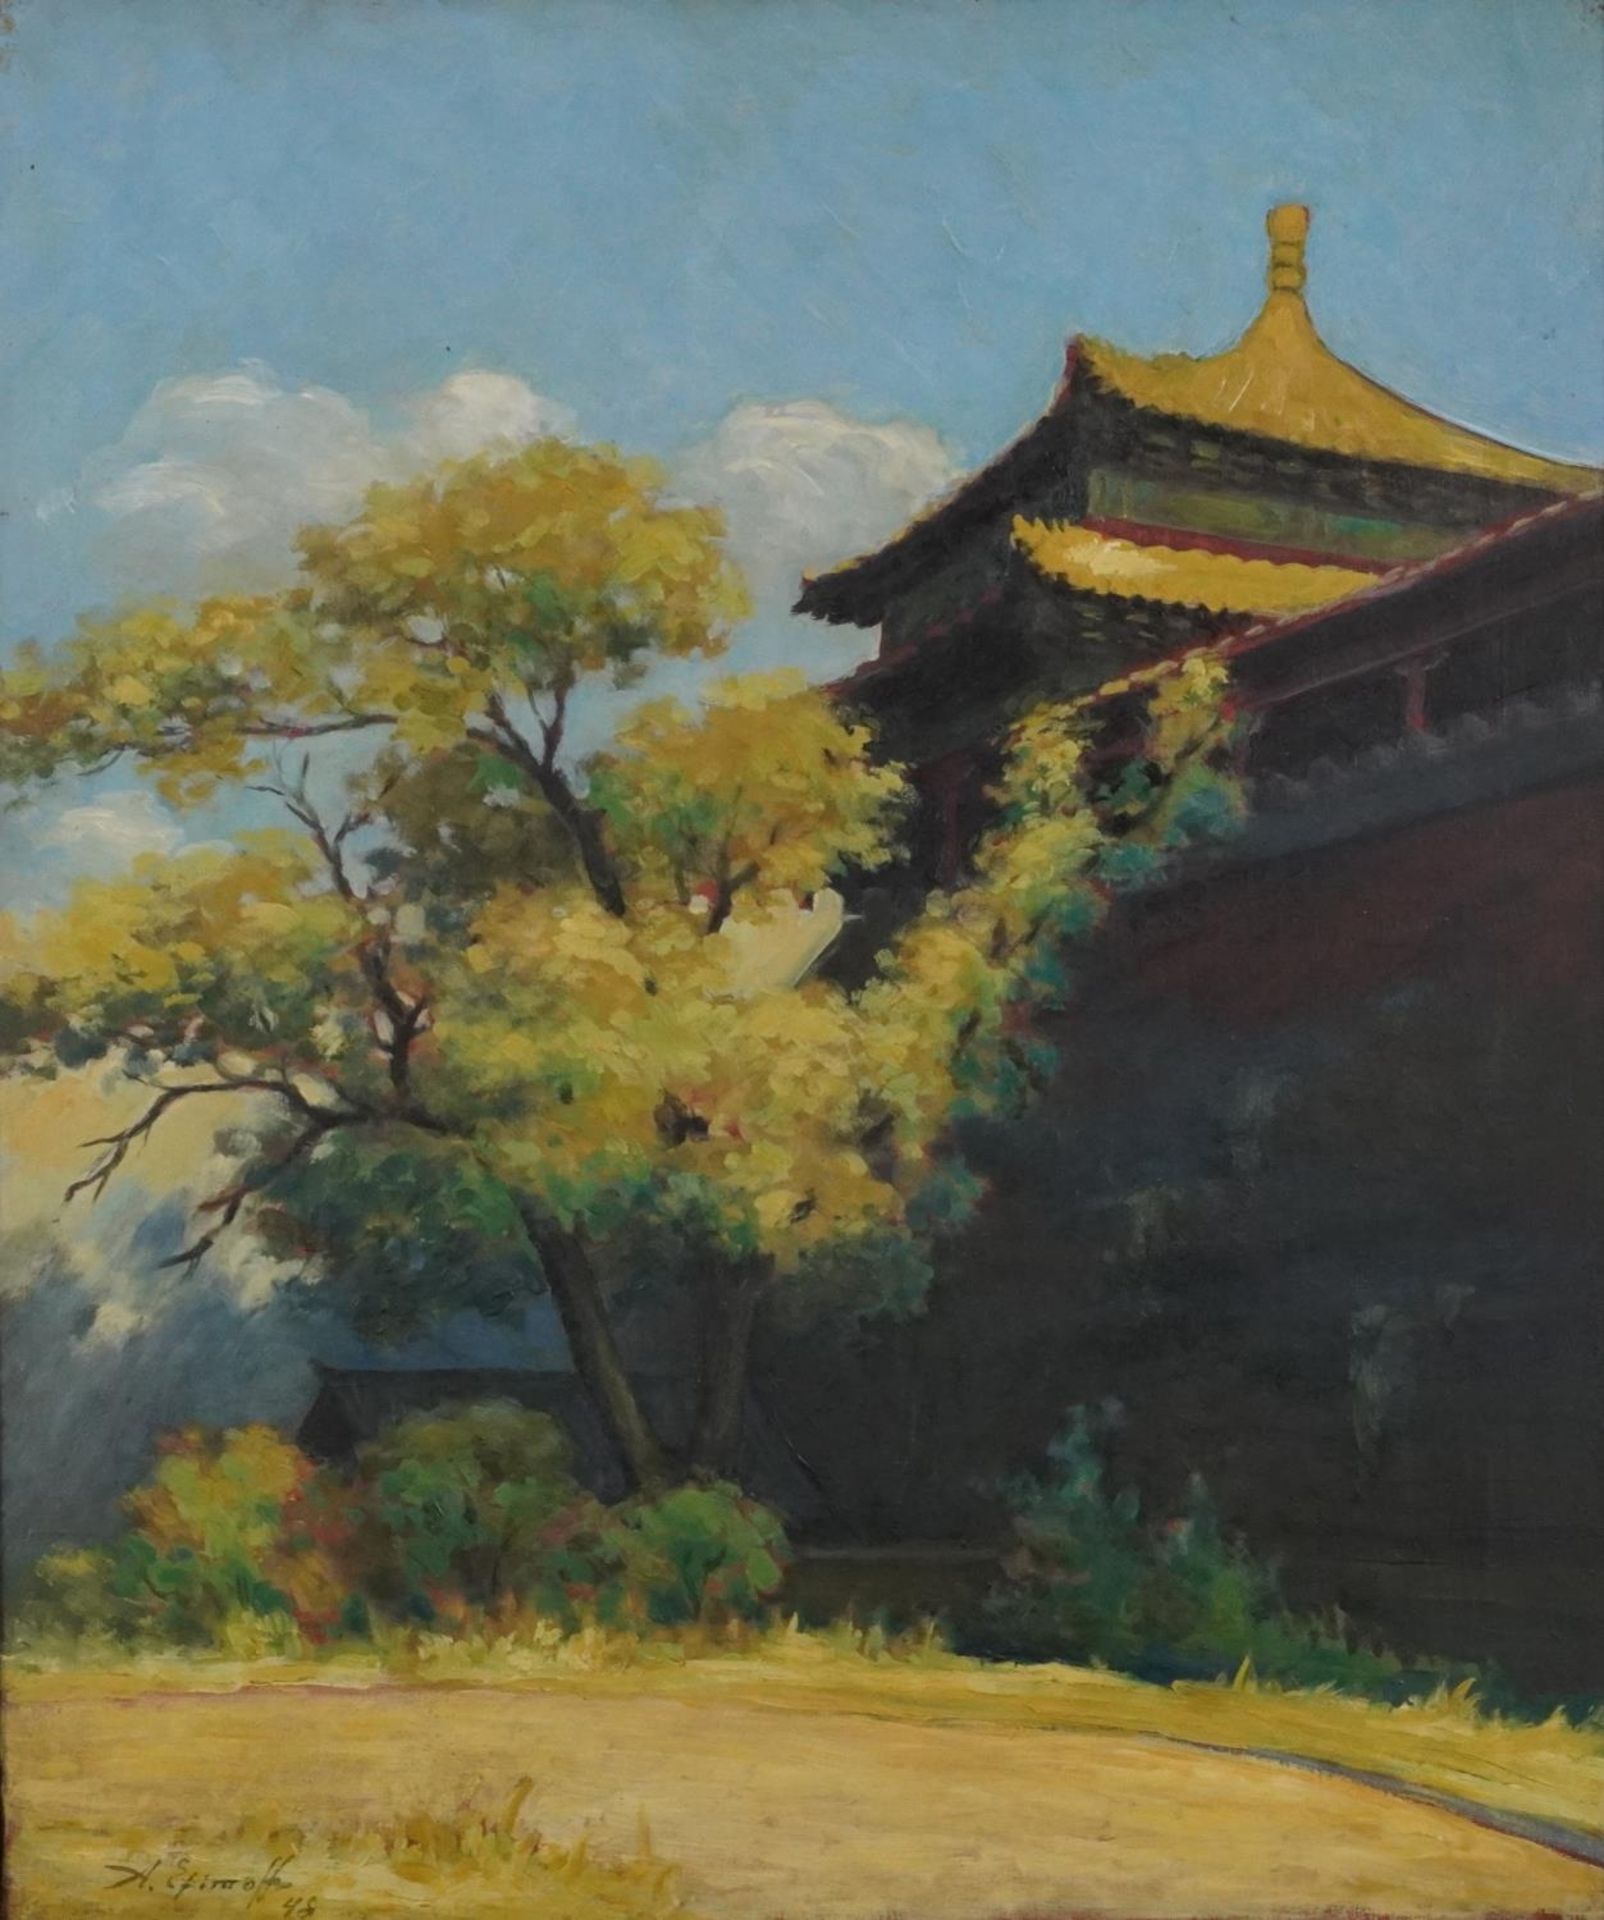 Tree before pagoda, Asian school oil on canvas, signed and dated 1948, framed, 66cm x 55cm excluding